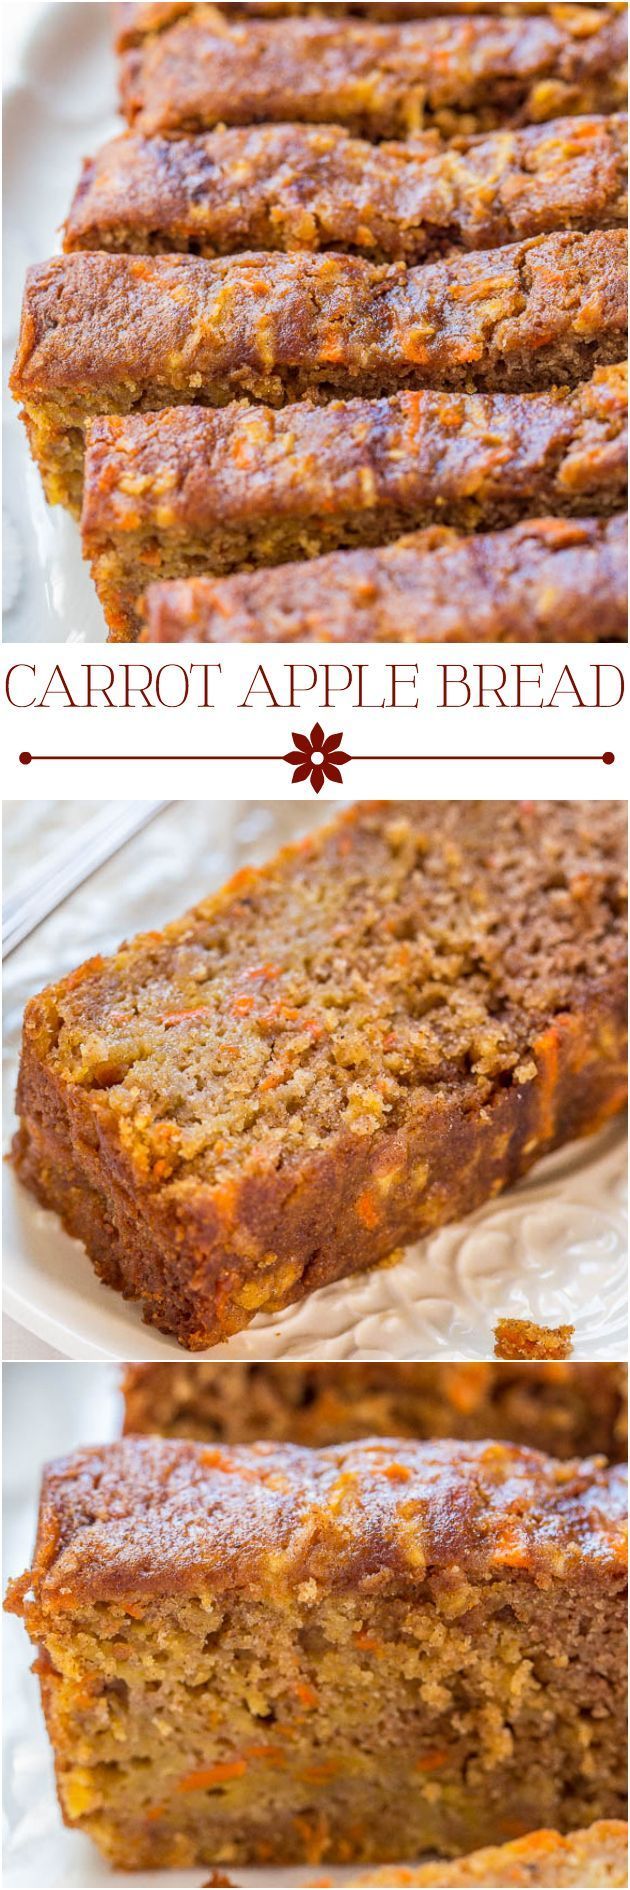 Carrot Apple Bread – Carrot cake with apples added and baked as a bread so it’s healthier! Super moist, packed with flavor, fast